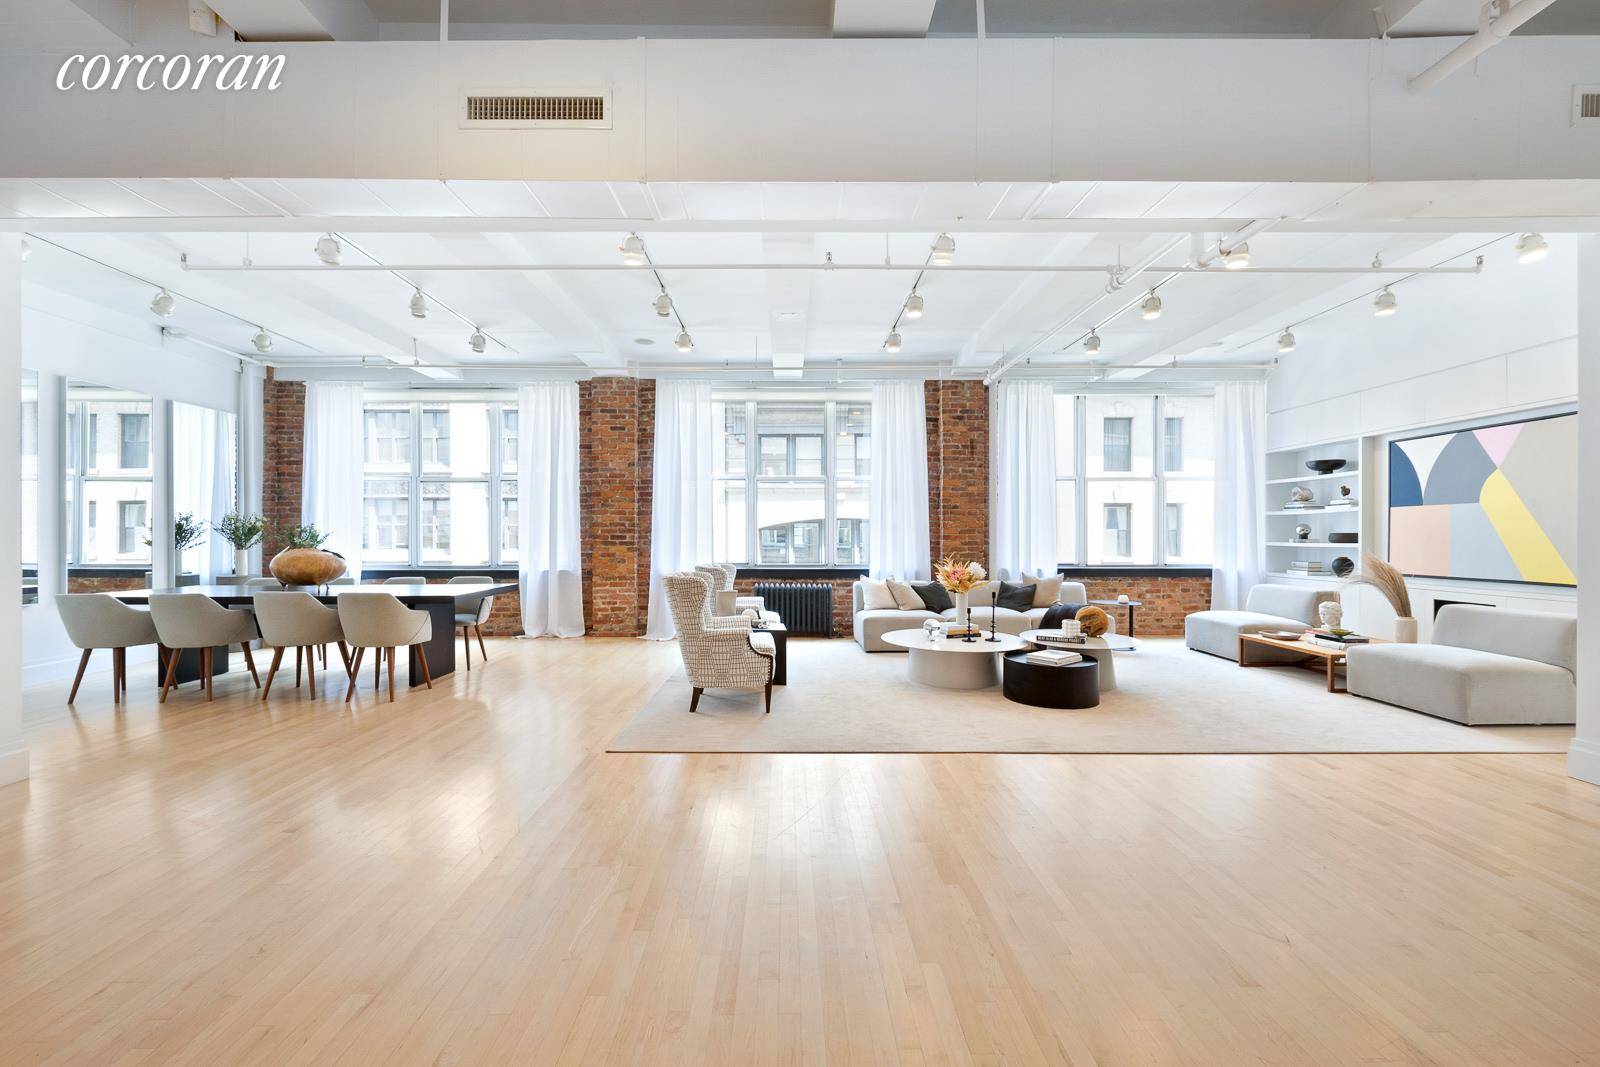 Rarely available at the crossroads of Chelsea and Madison Square Park is a sumptuous amount of space in a 4000 sqft loft residence spanning the entire 5th floor.